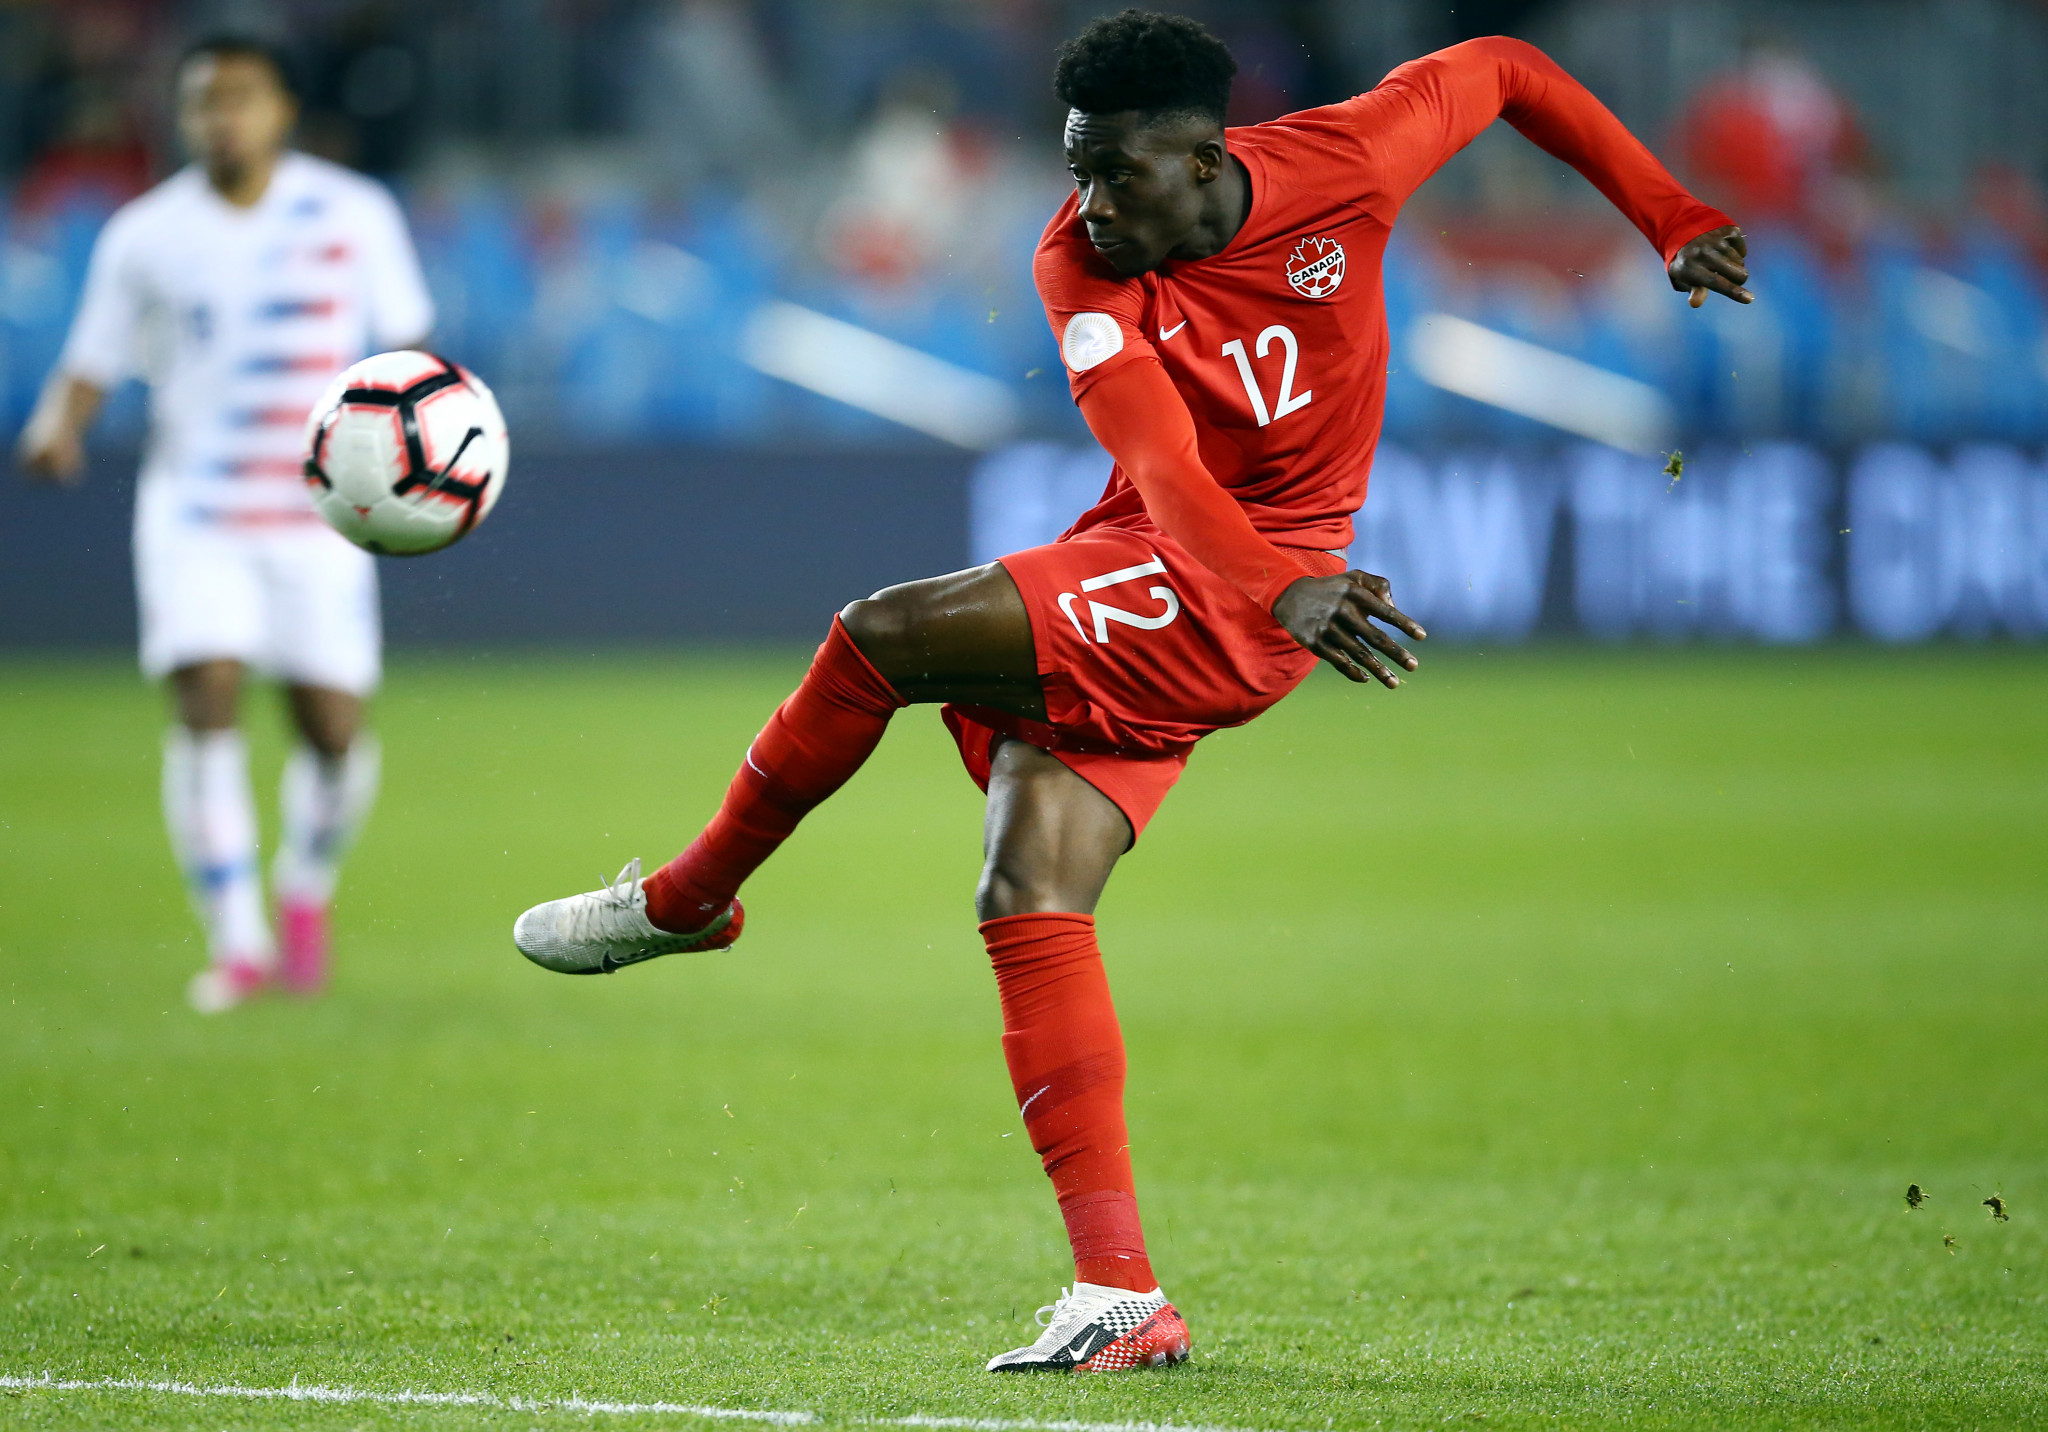 Canada's decision to not play international football matches this month will not see the team miss out on qualifying for the 2022 FIFA World Cup, with qualifiers pushed back to March ©Getty Images